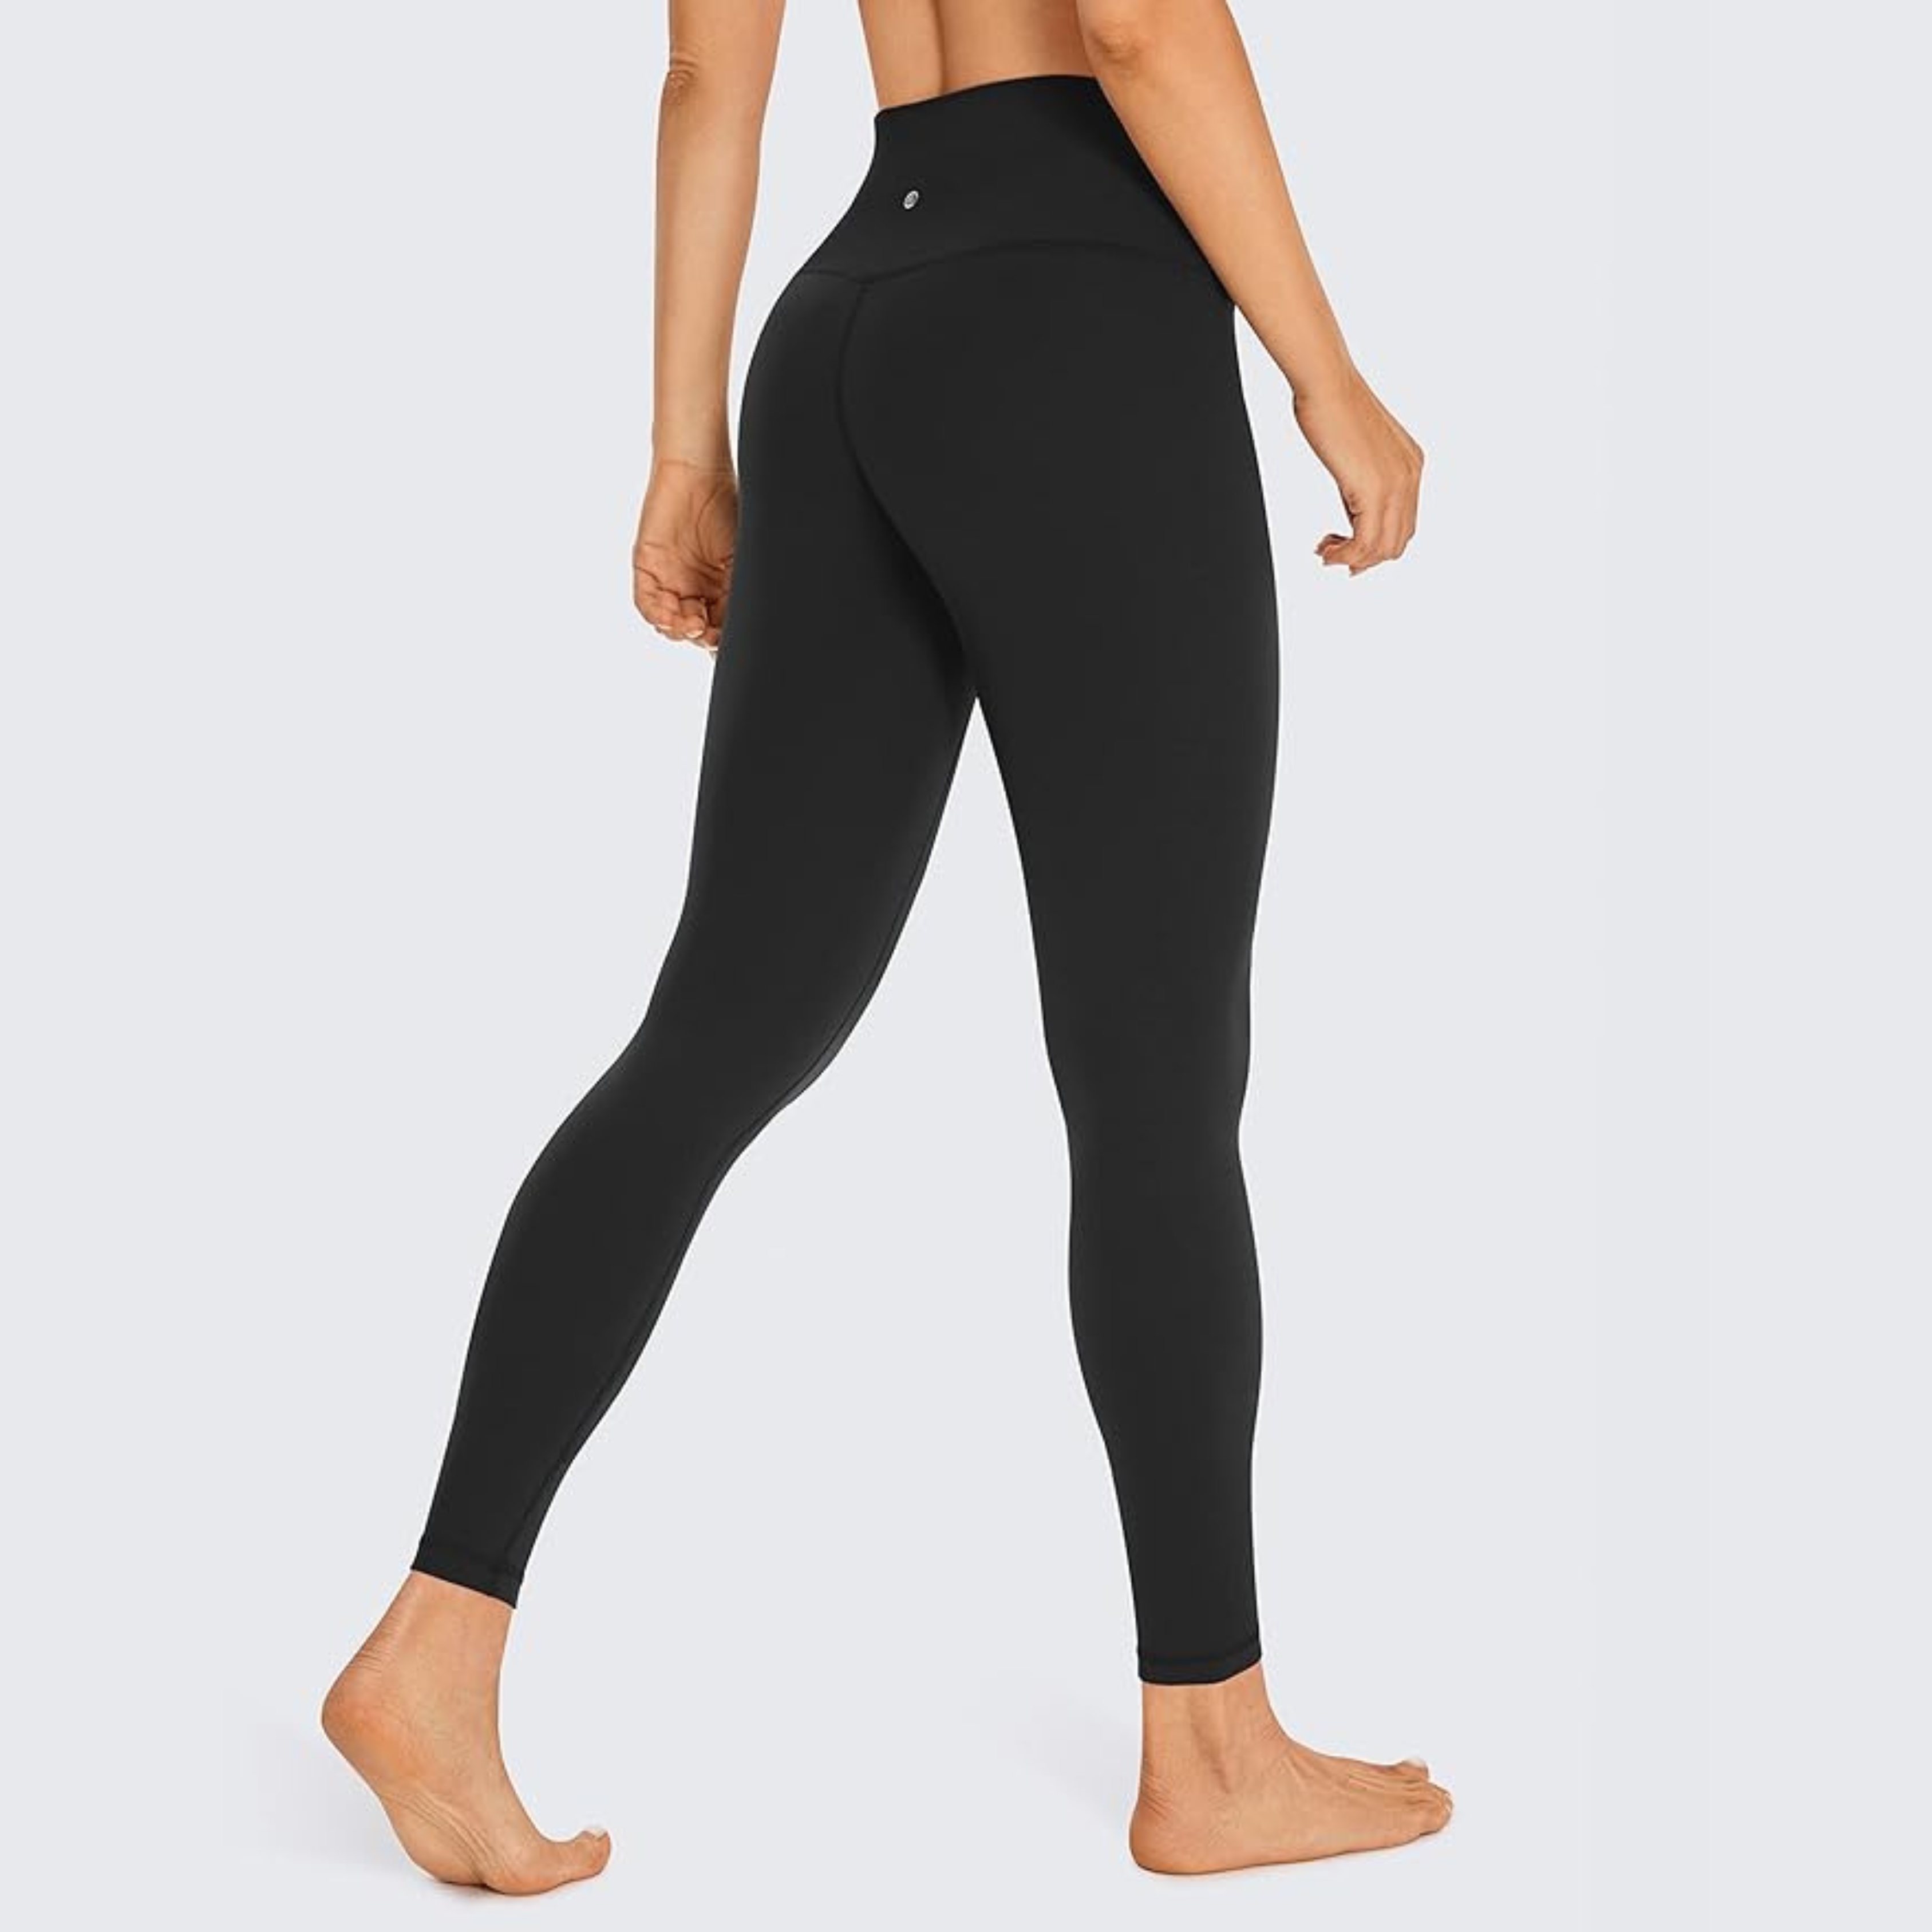 The BEST leggings🤩 use code 10BriSea for 10% at amzn.to/3hXBHR5 & che